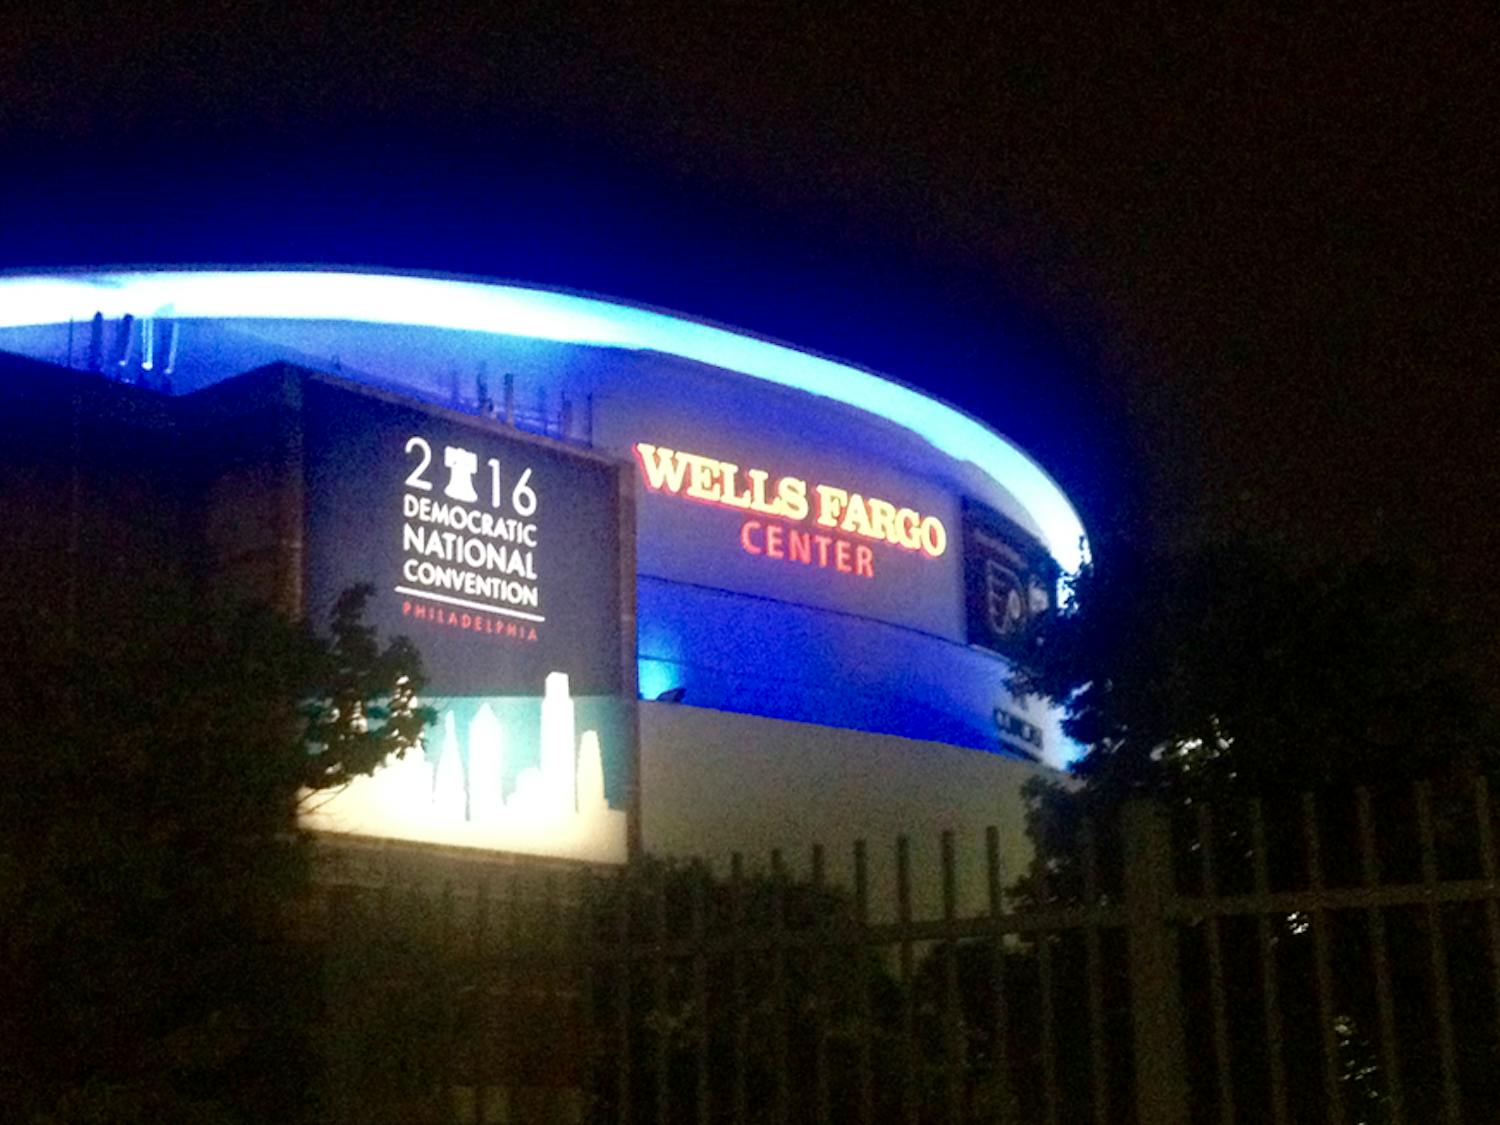 The Wells Fargo Center, bathed in blue on the first night of hosting the Democratic National Convention in Philadelphia on July 25, 2016.